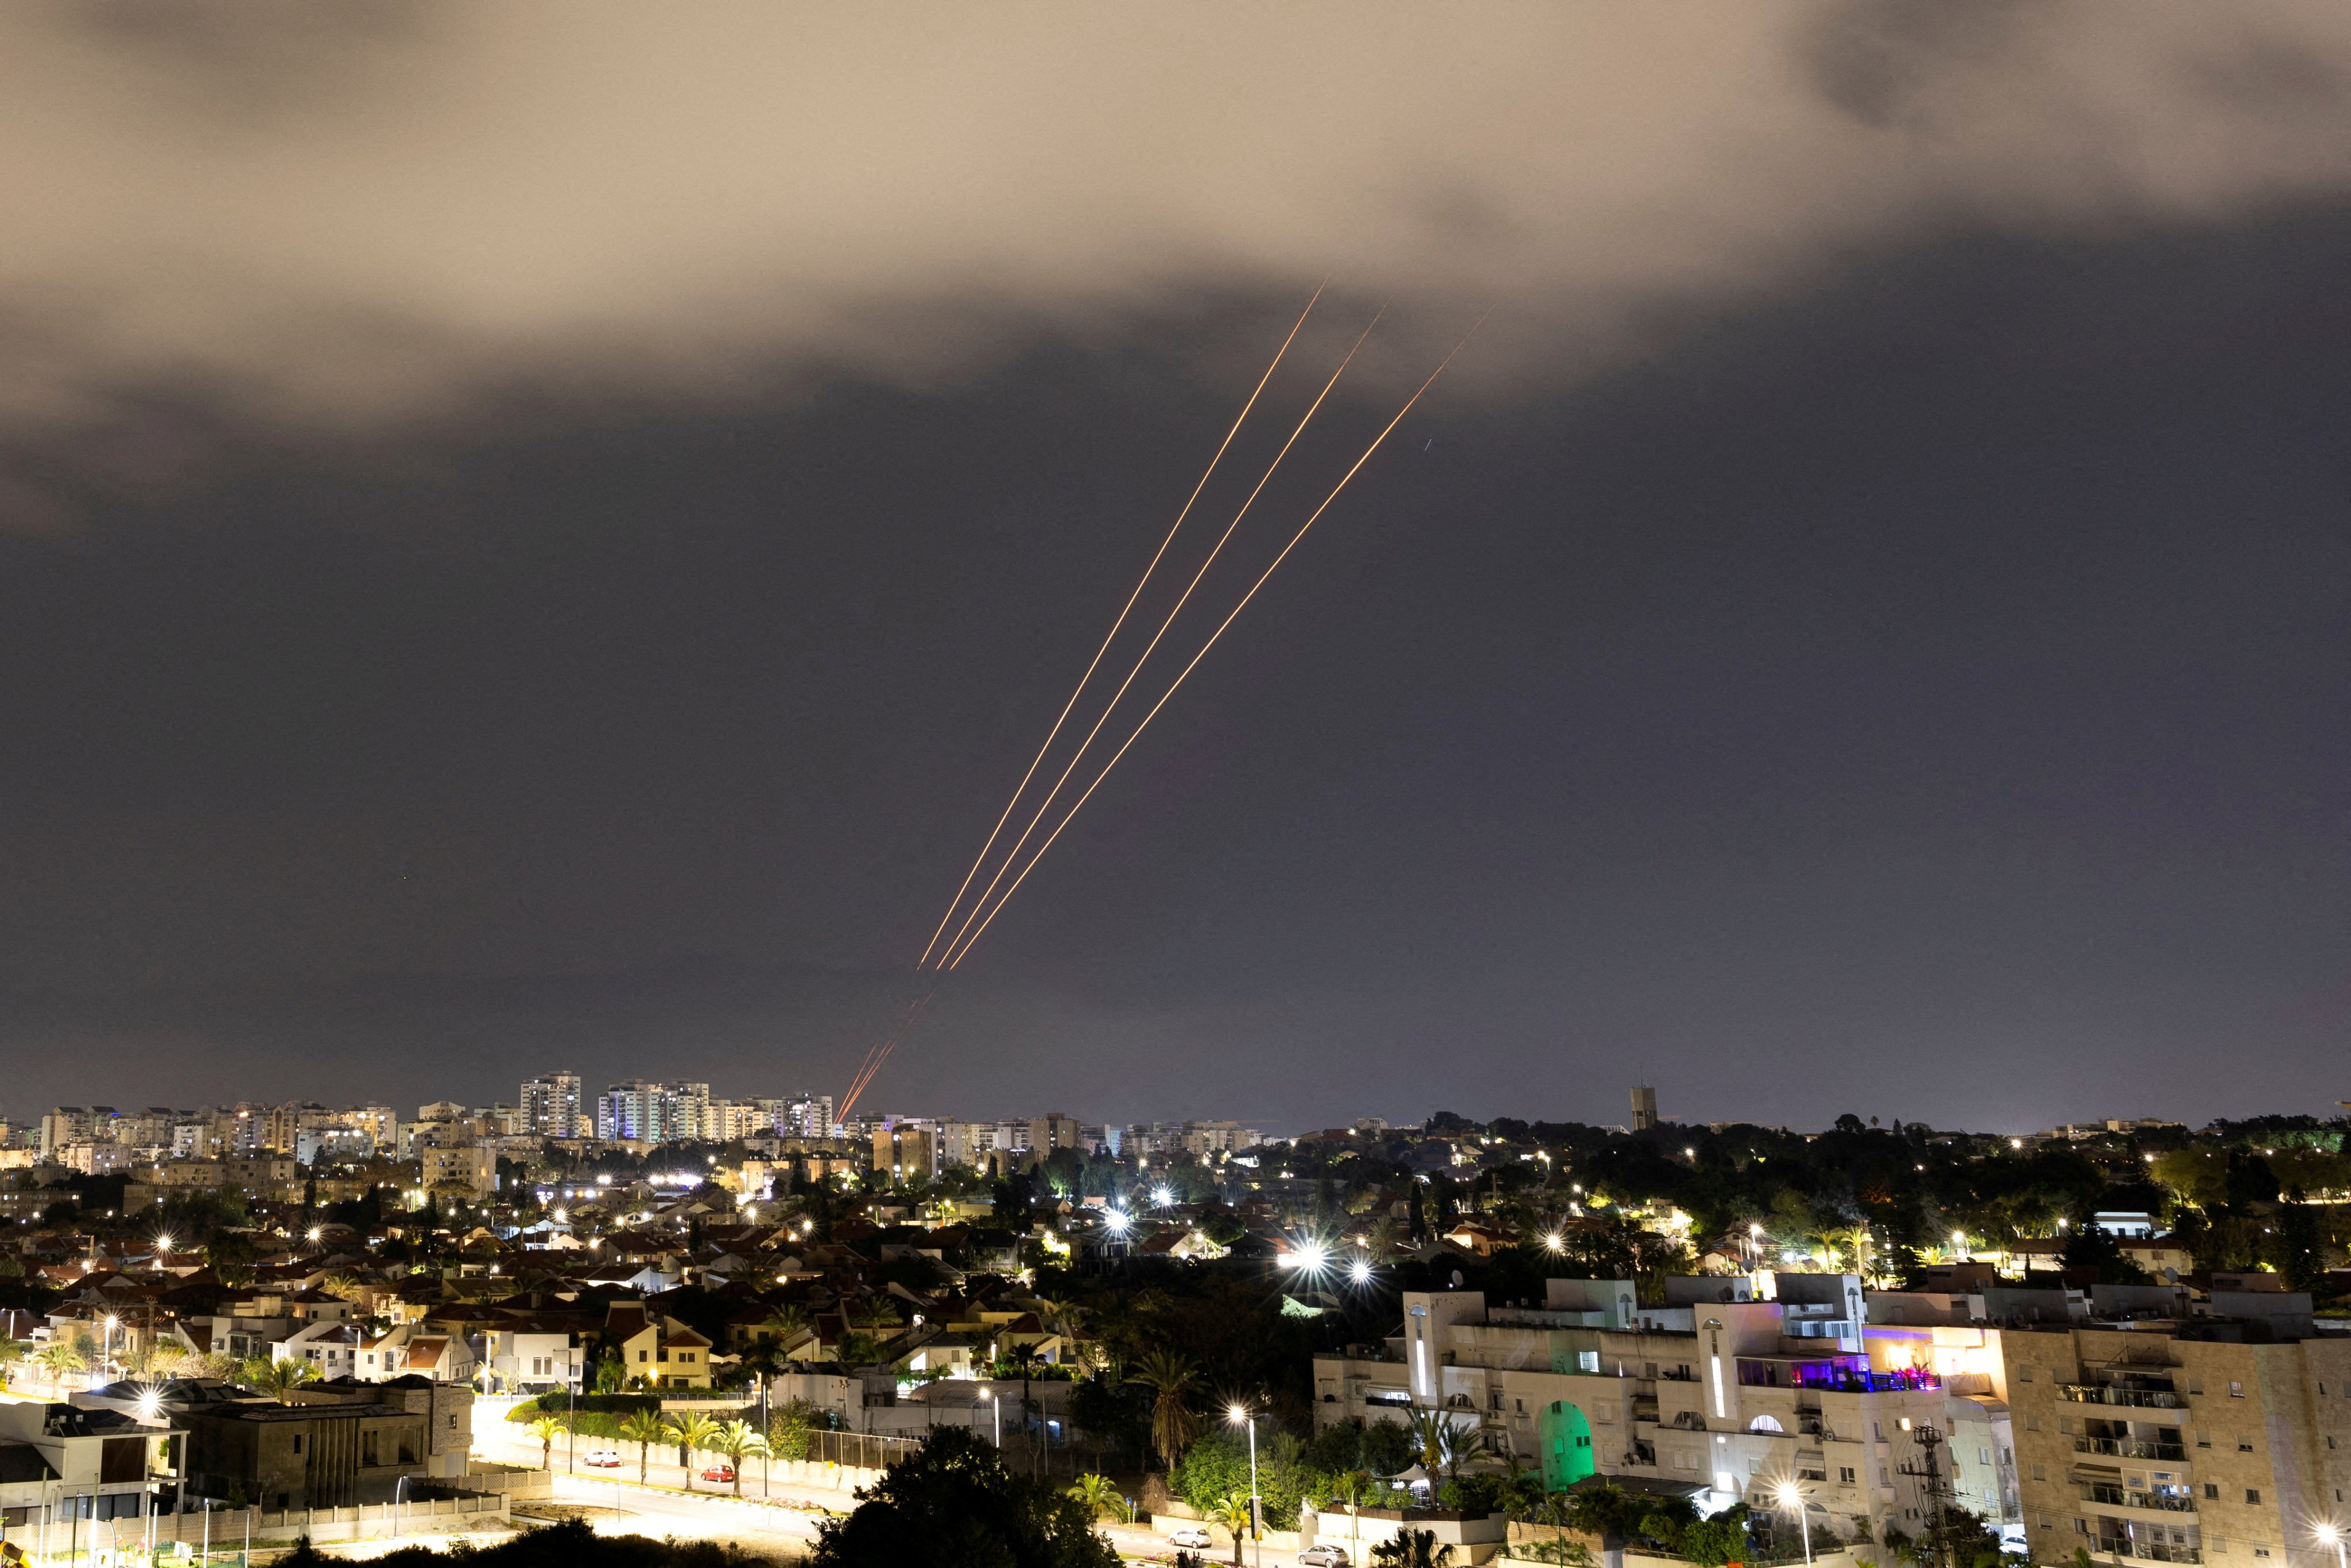 An anti-missile system operates after Iran launched drones and missiles towards Israel, as seen from Ashkelon, Israel, on April 14. Photo: Reuters